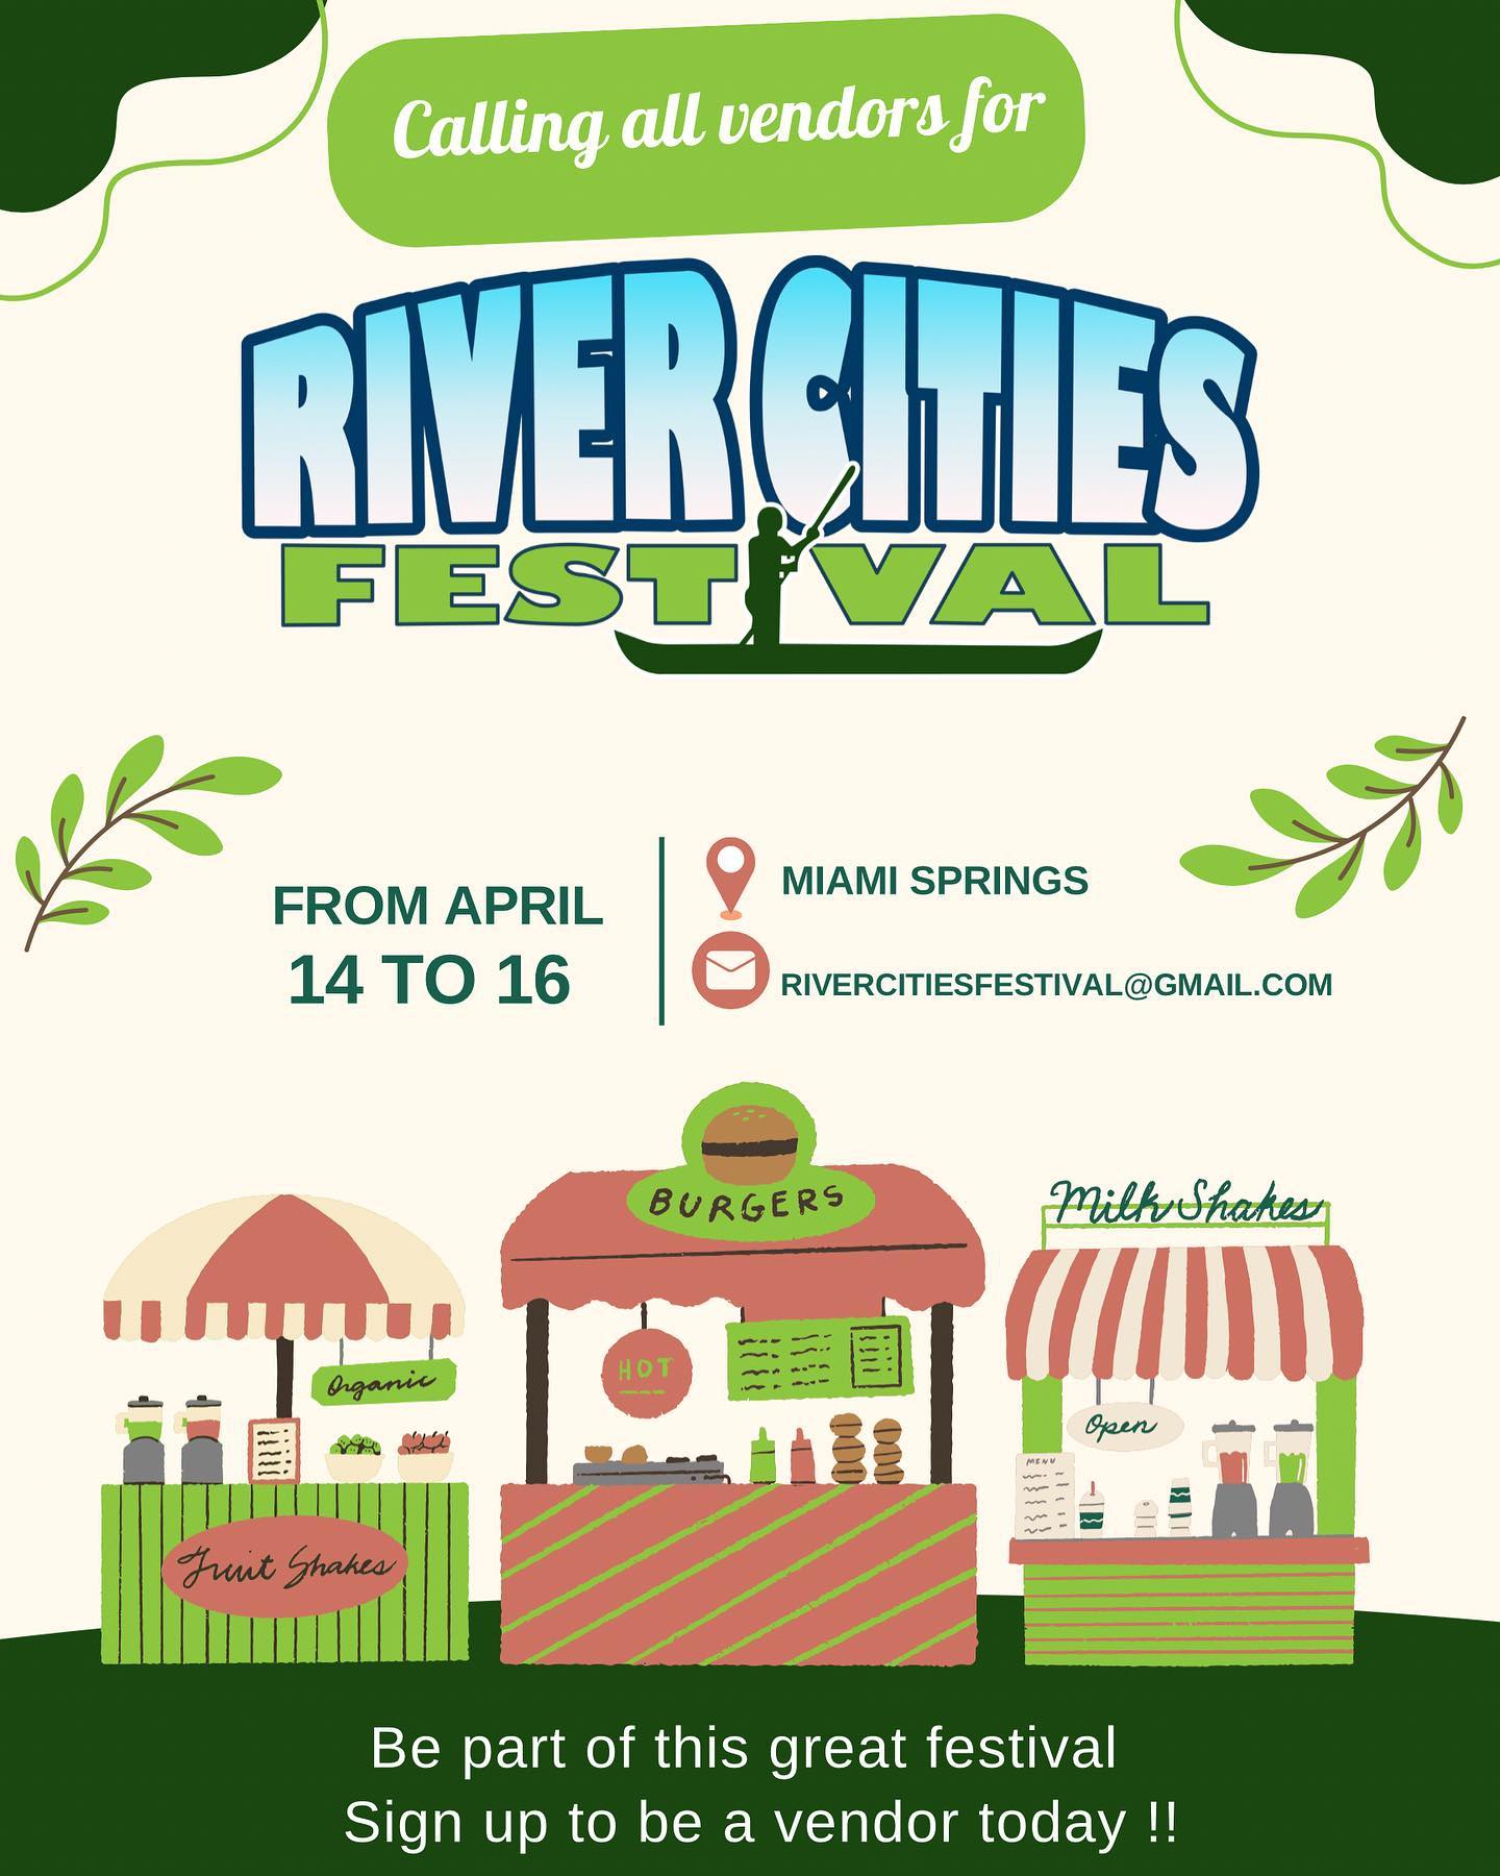 The River Cities Festival